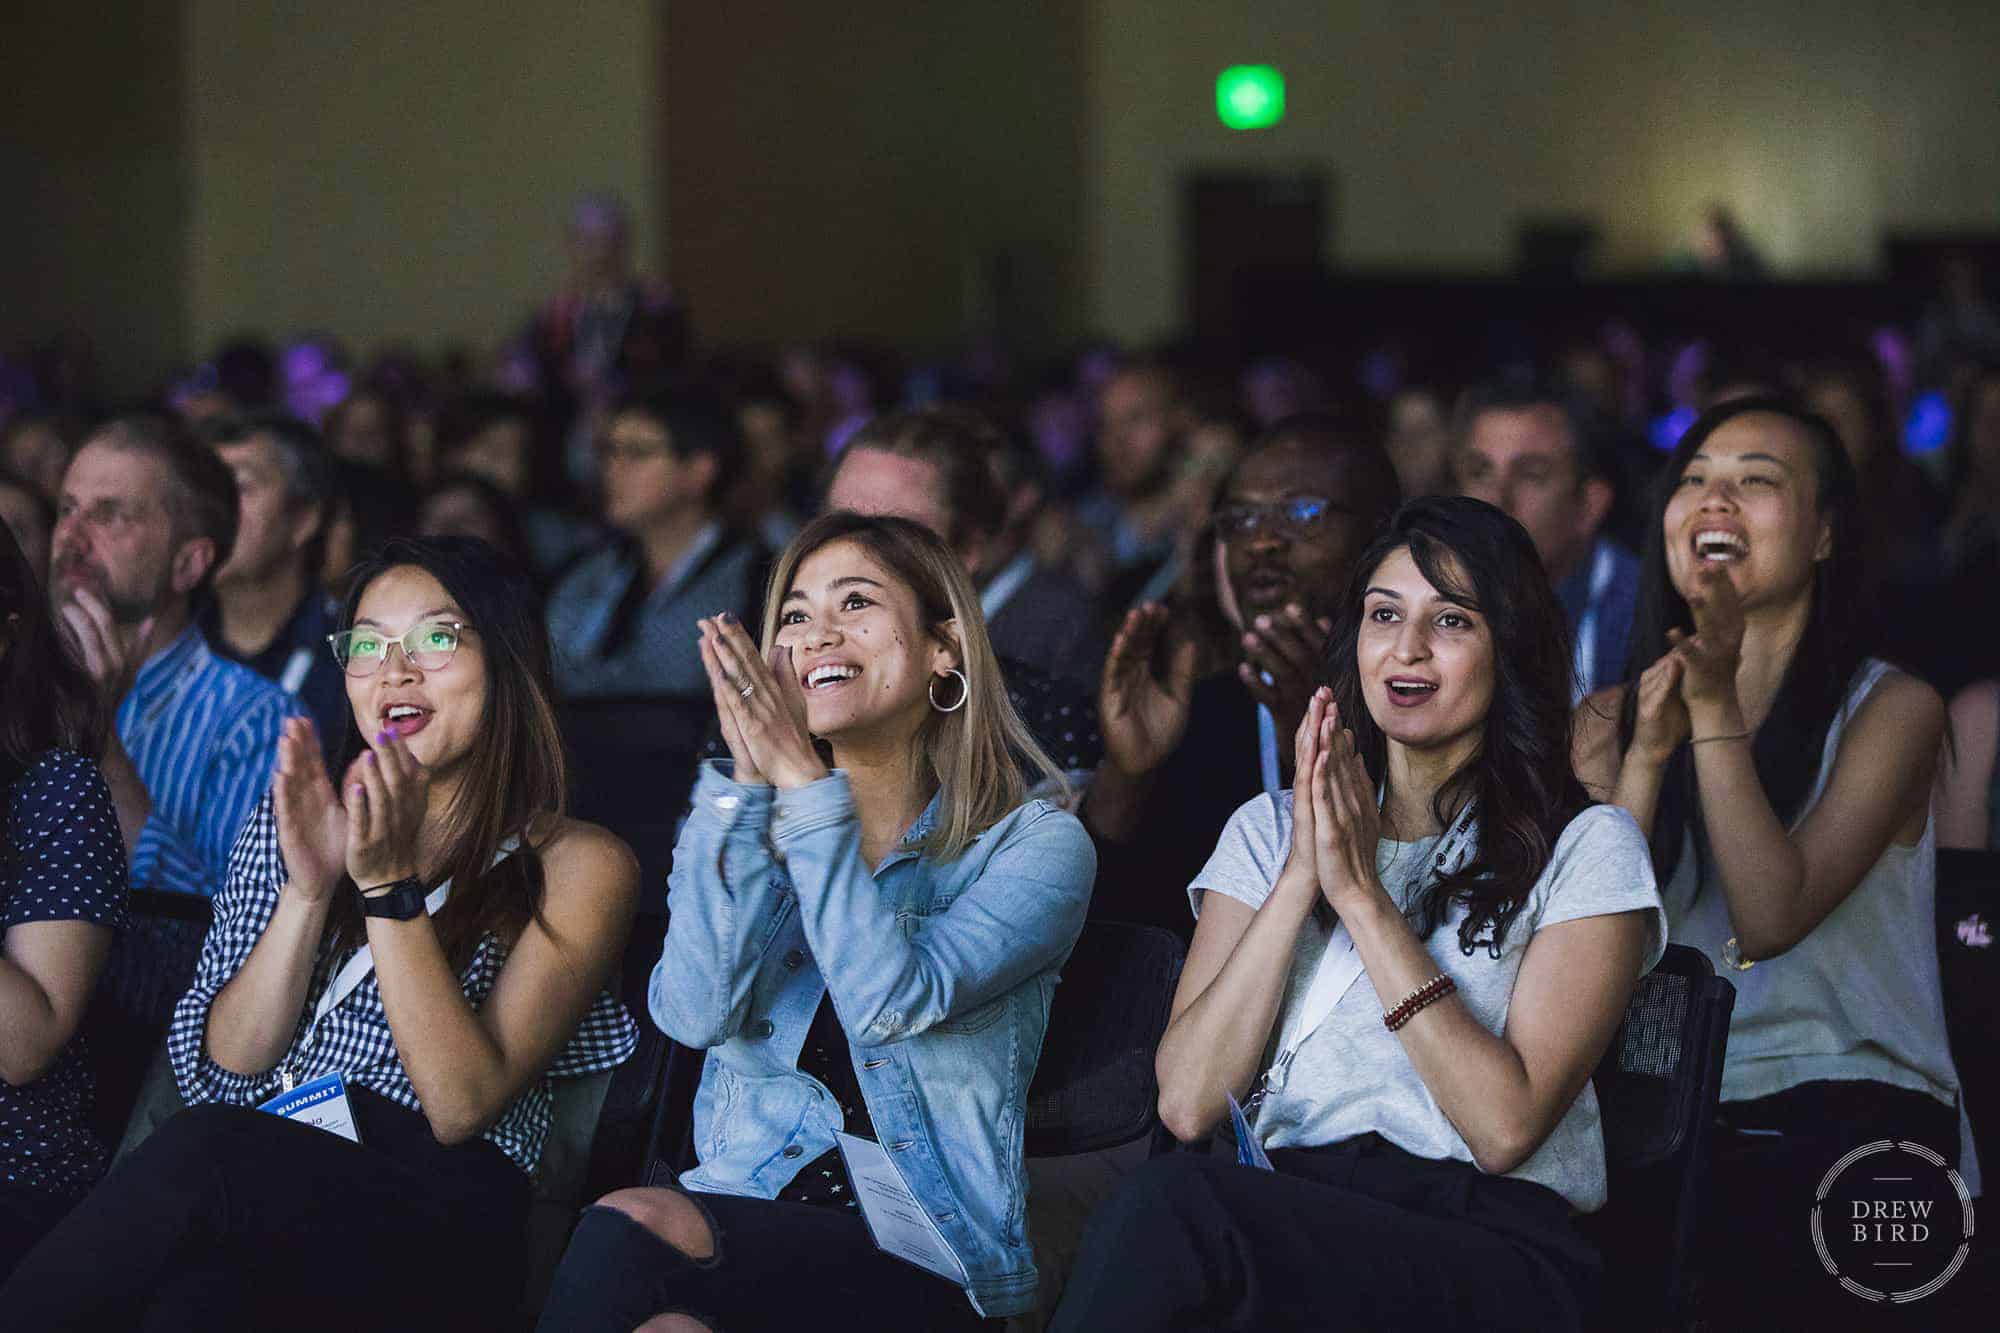 Photo of audience clapping at a corporate event in San Francisco from Oakland based photographer Drew Bird.